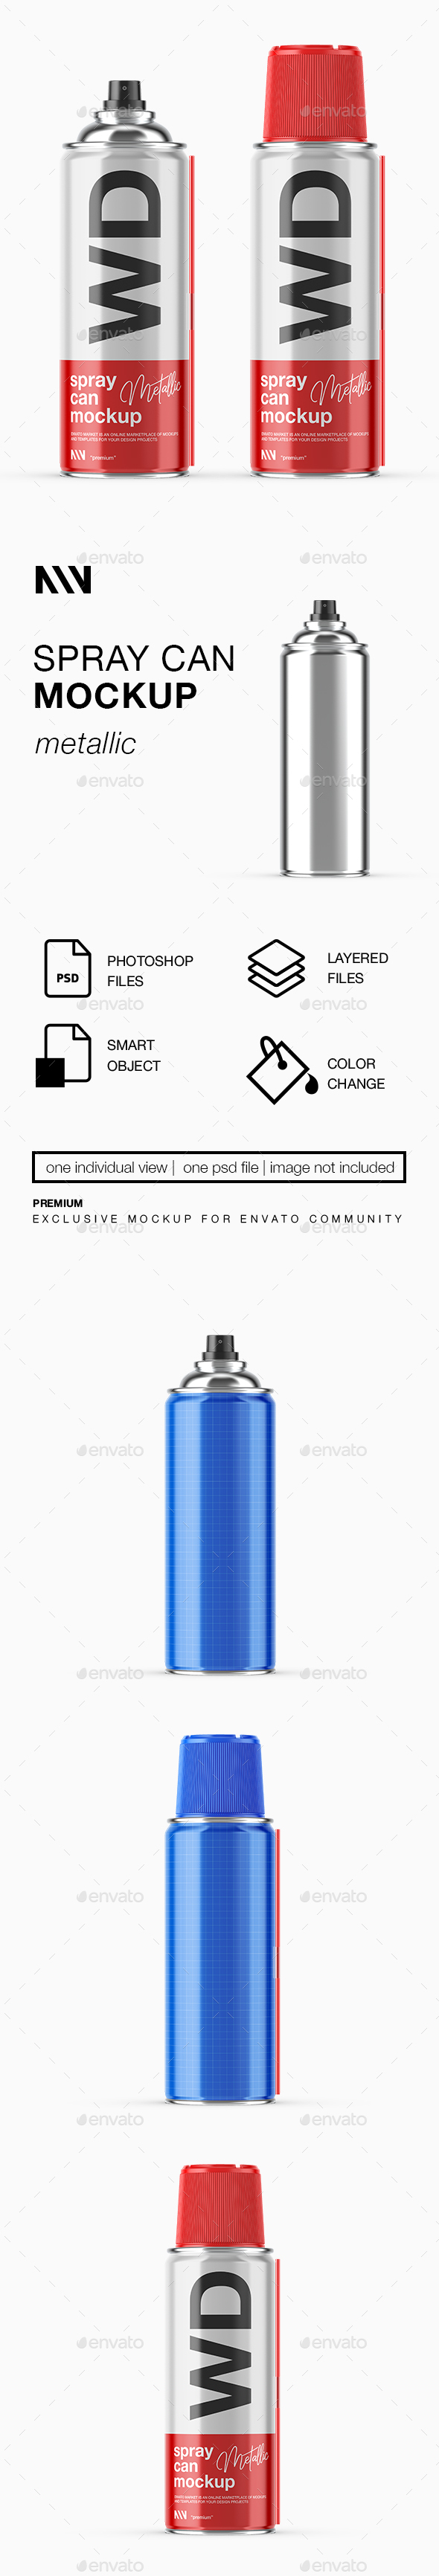 [DOWNLOAD]Spray Can Mockup